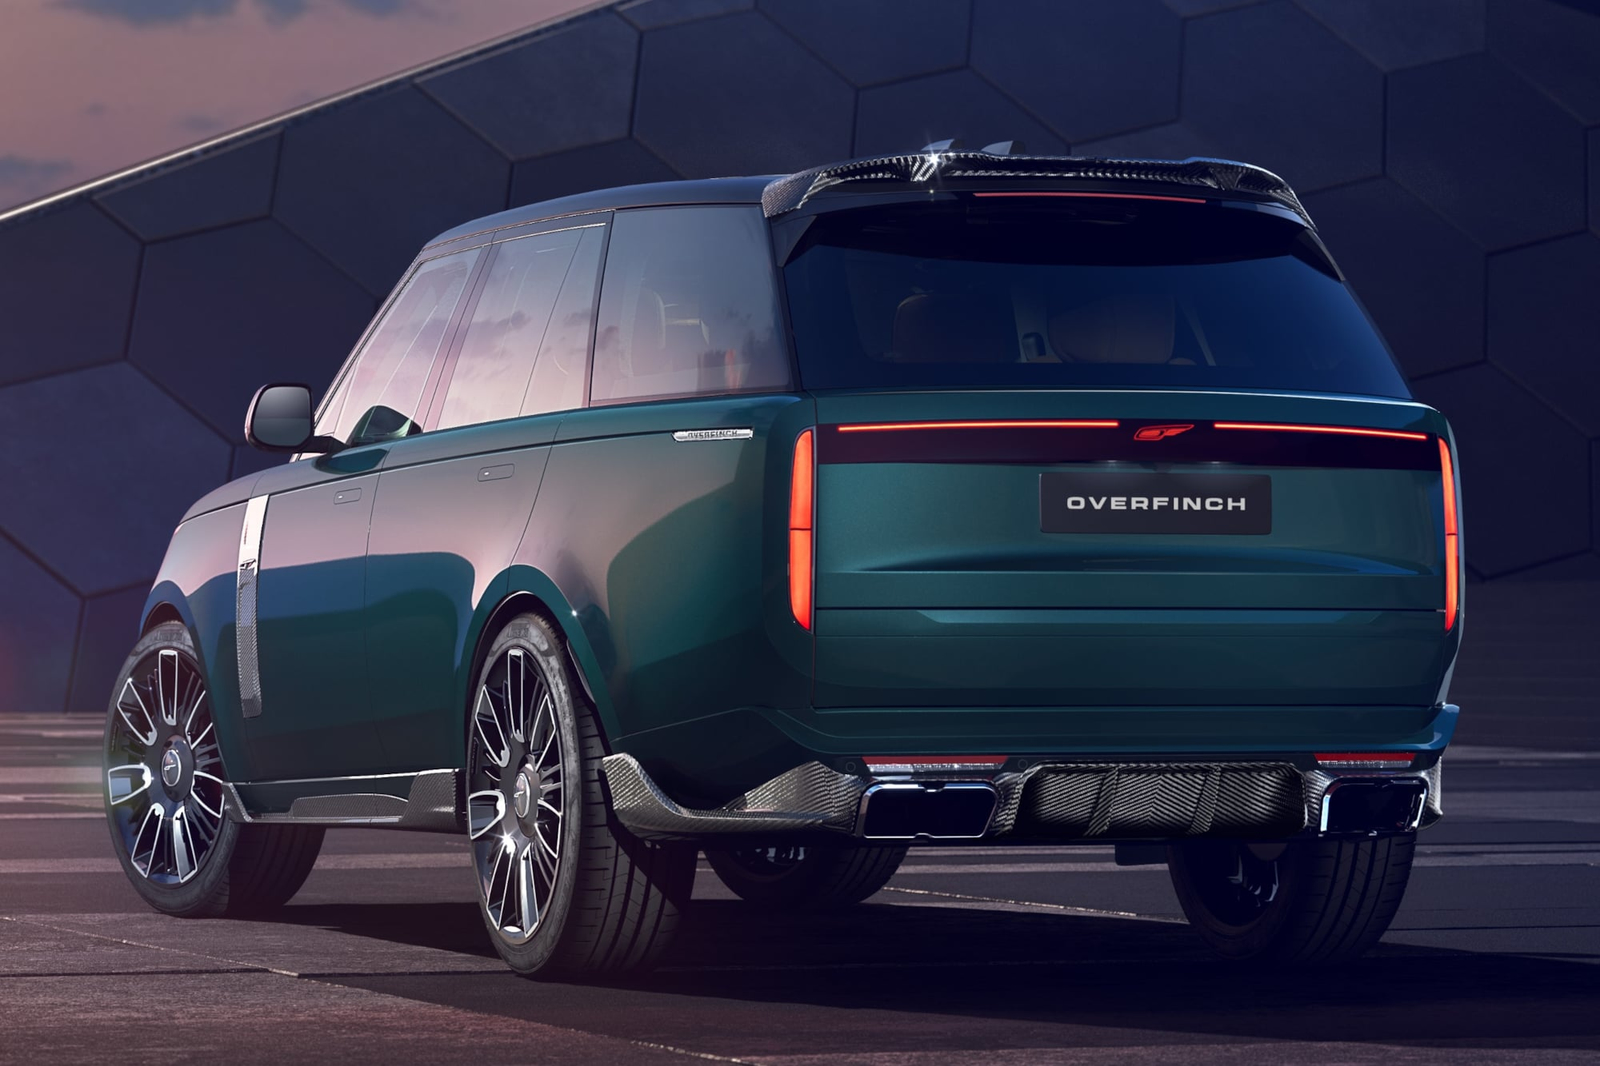 tuning, off-road, overfinch range rover can give bentley bentayga a run for its money